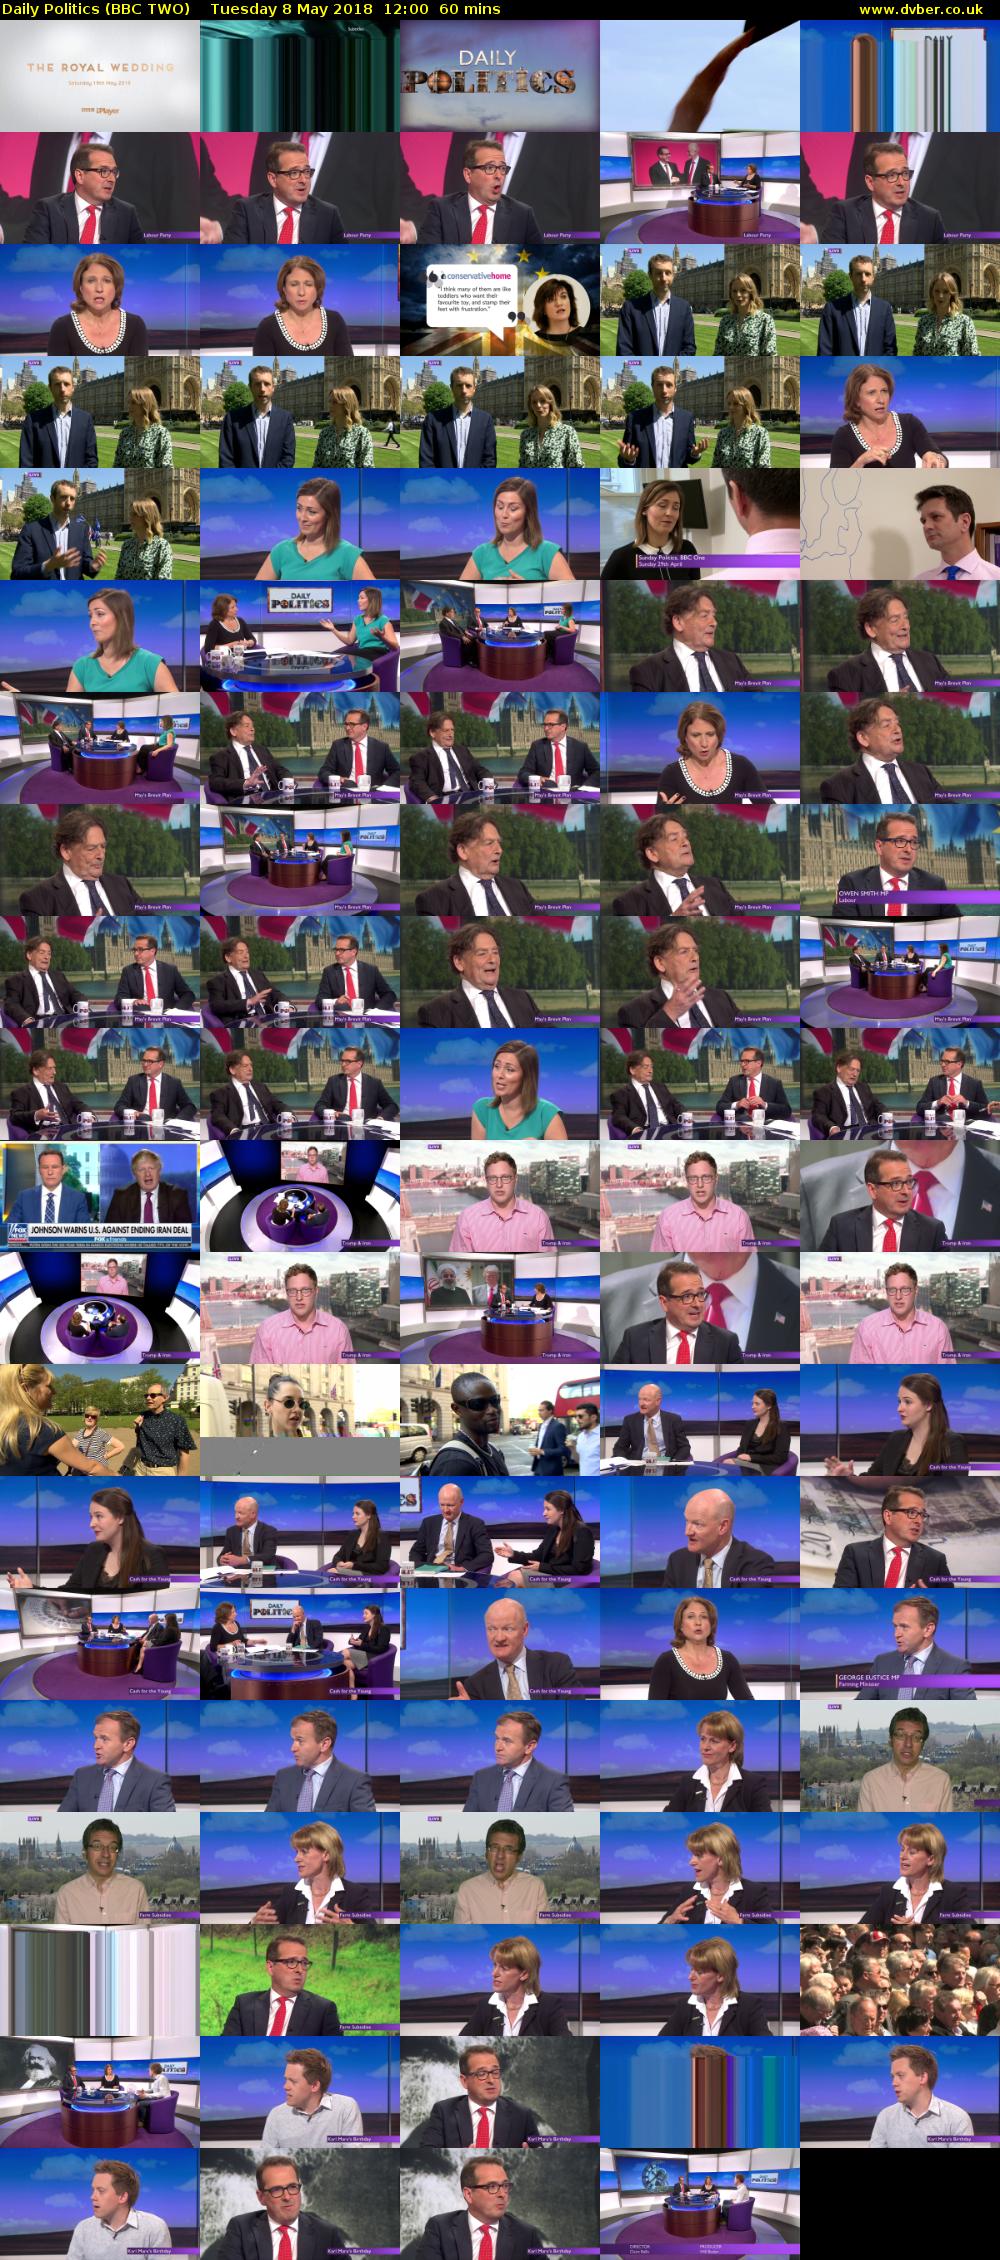 Daily Politics (BBC TWO) Tuesday 8 May 2018 12:00 - 13:00